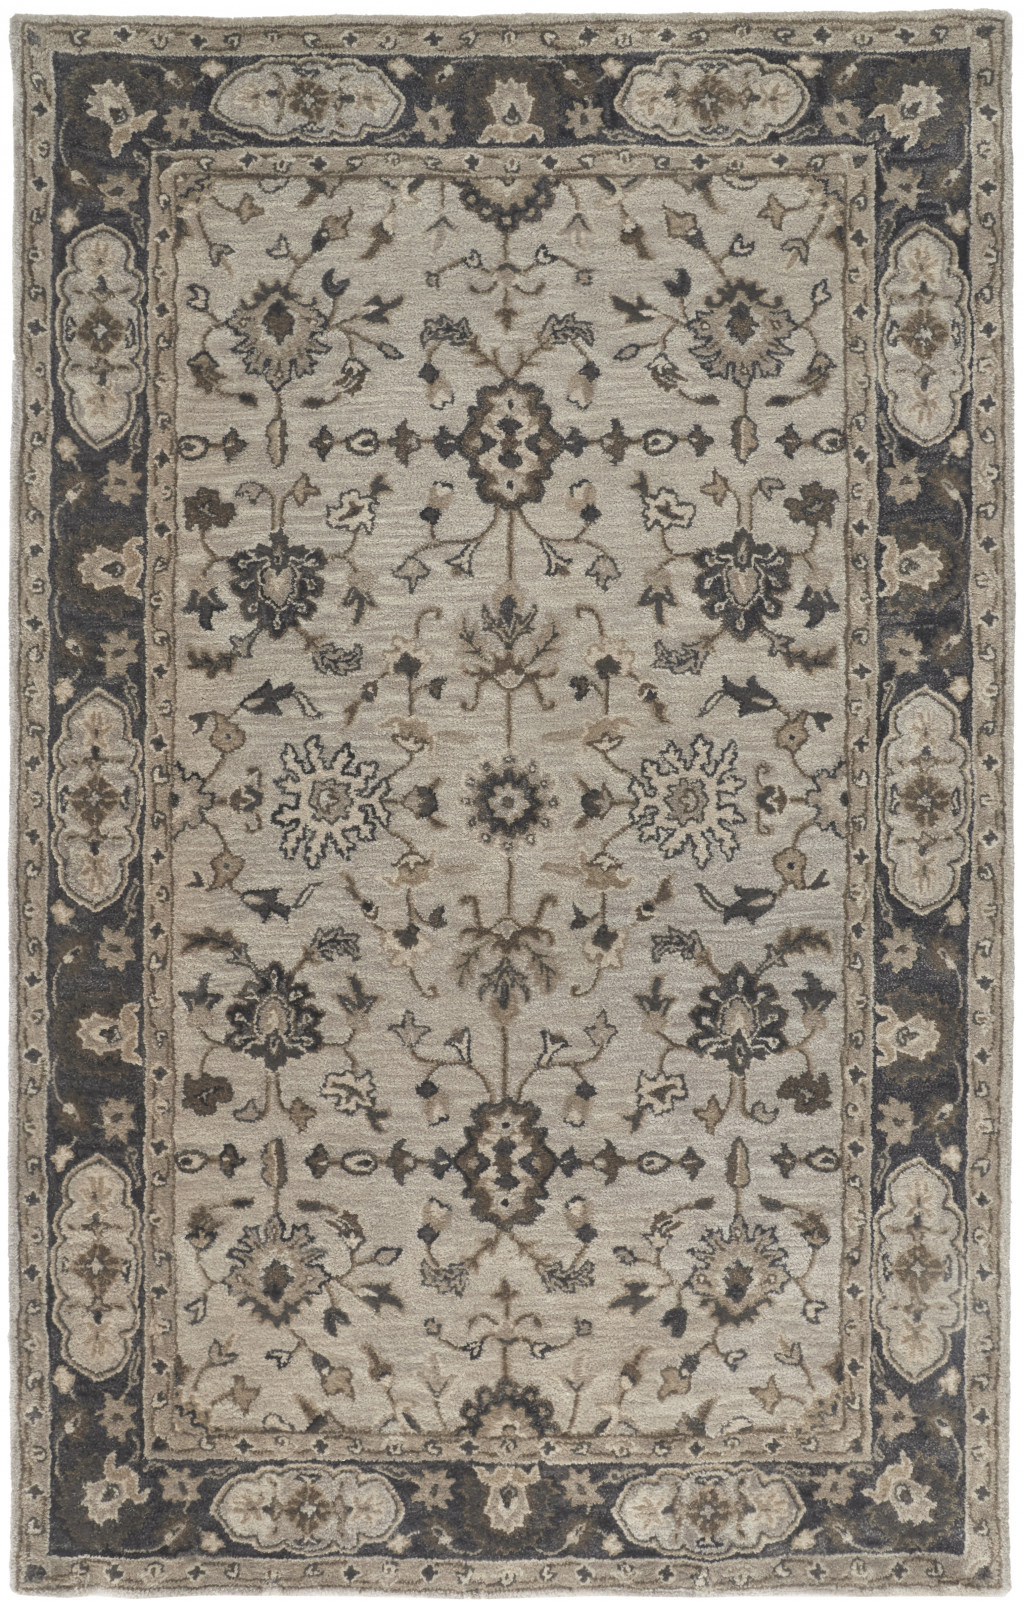 10' X 13' Gray Ivory And Taupe Wool Floral Tufted Handmade Stain Resistant Area Rug-511275-1